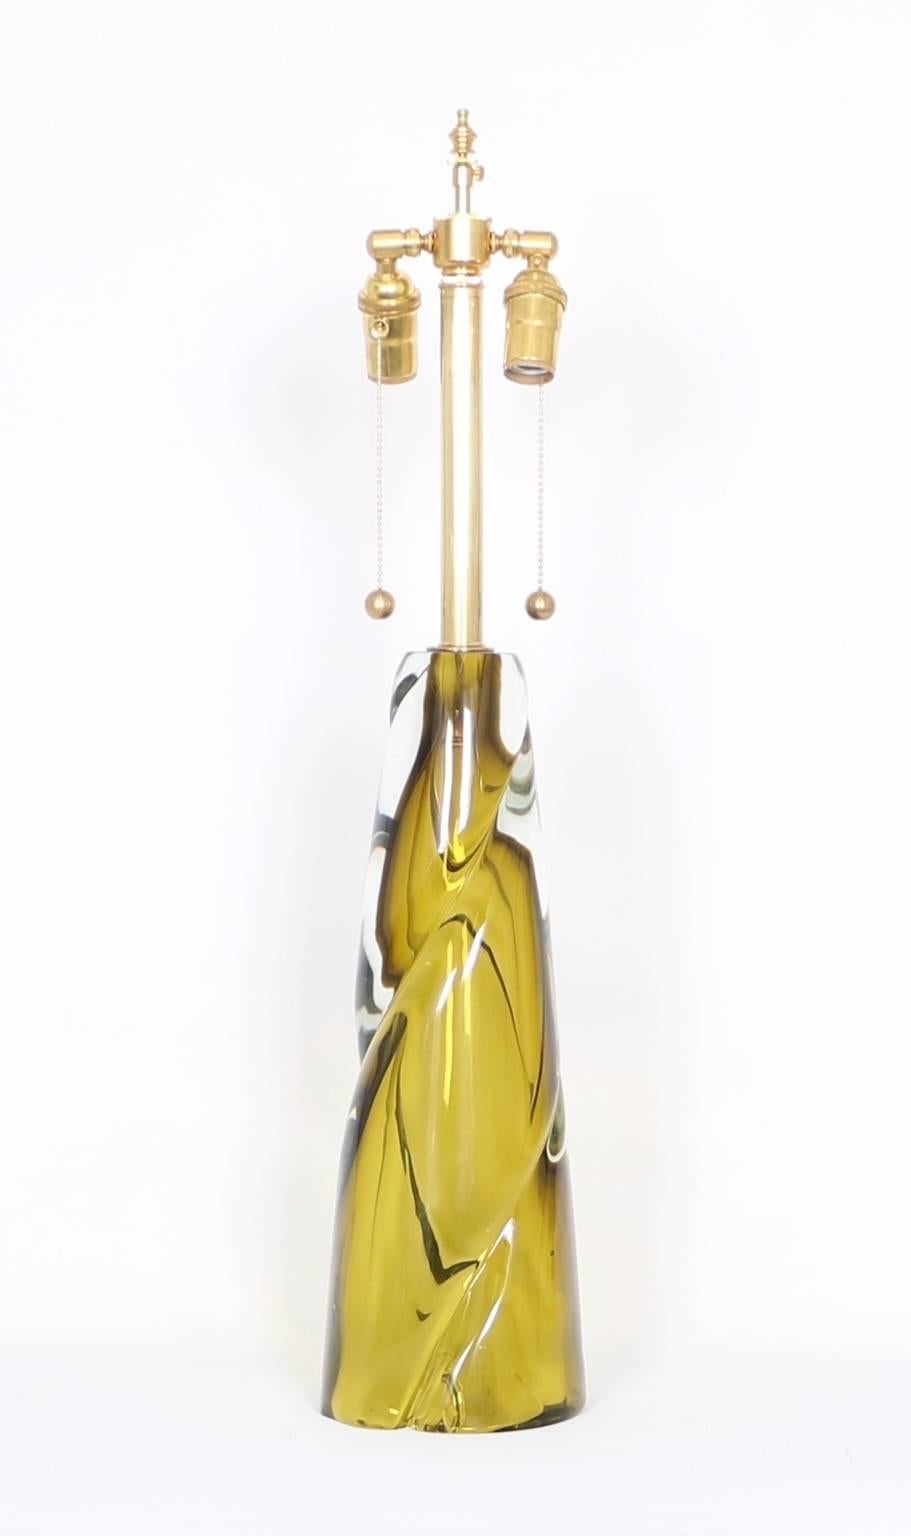 A Mid-Century Modern era table lamp by Seguso, produced in Italy circa 1950s, crafted of a single twisted piece of heavy chartreuse Murano glass with clear Sommerso layer. The noted height is to the finial; the height to the top of the glass body is